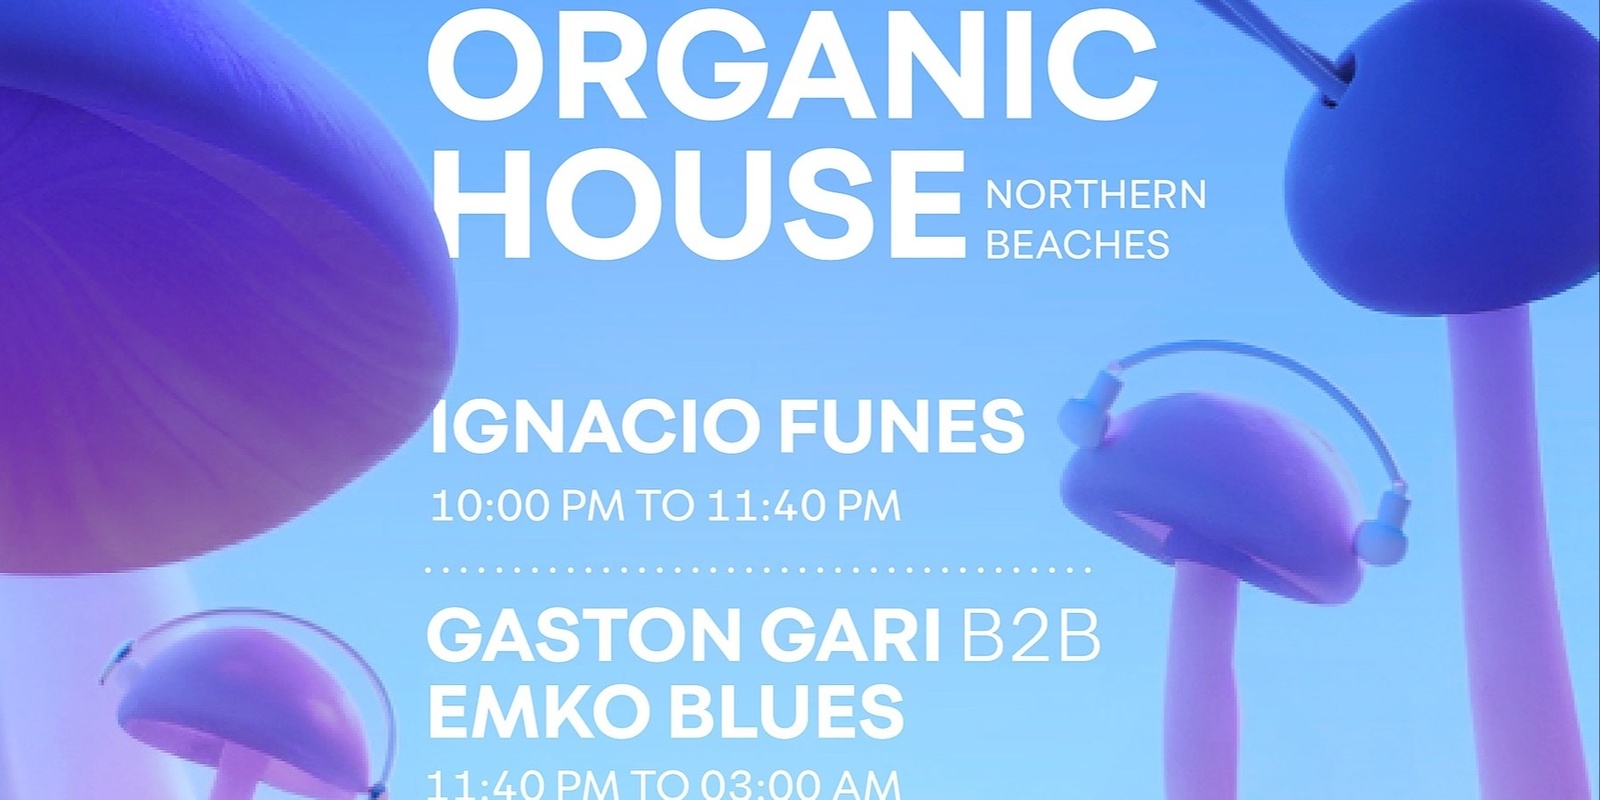 Banner image for Organic House at Northern Beaches